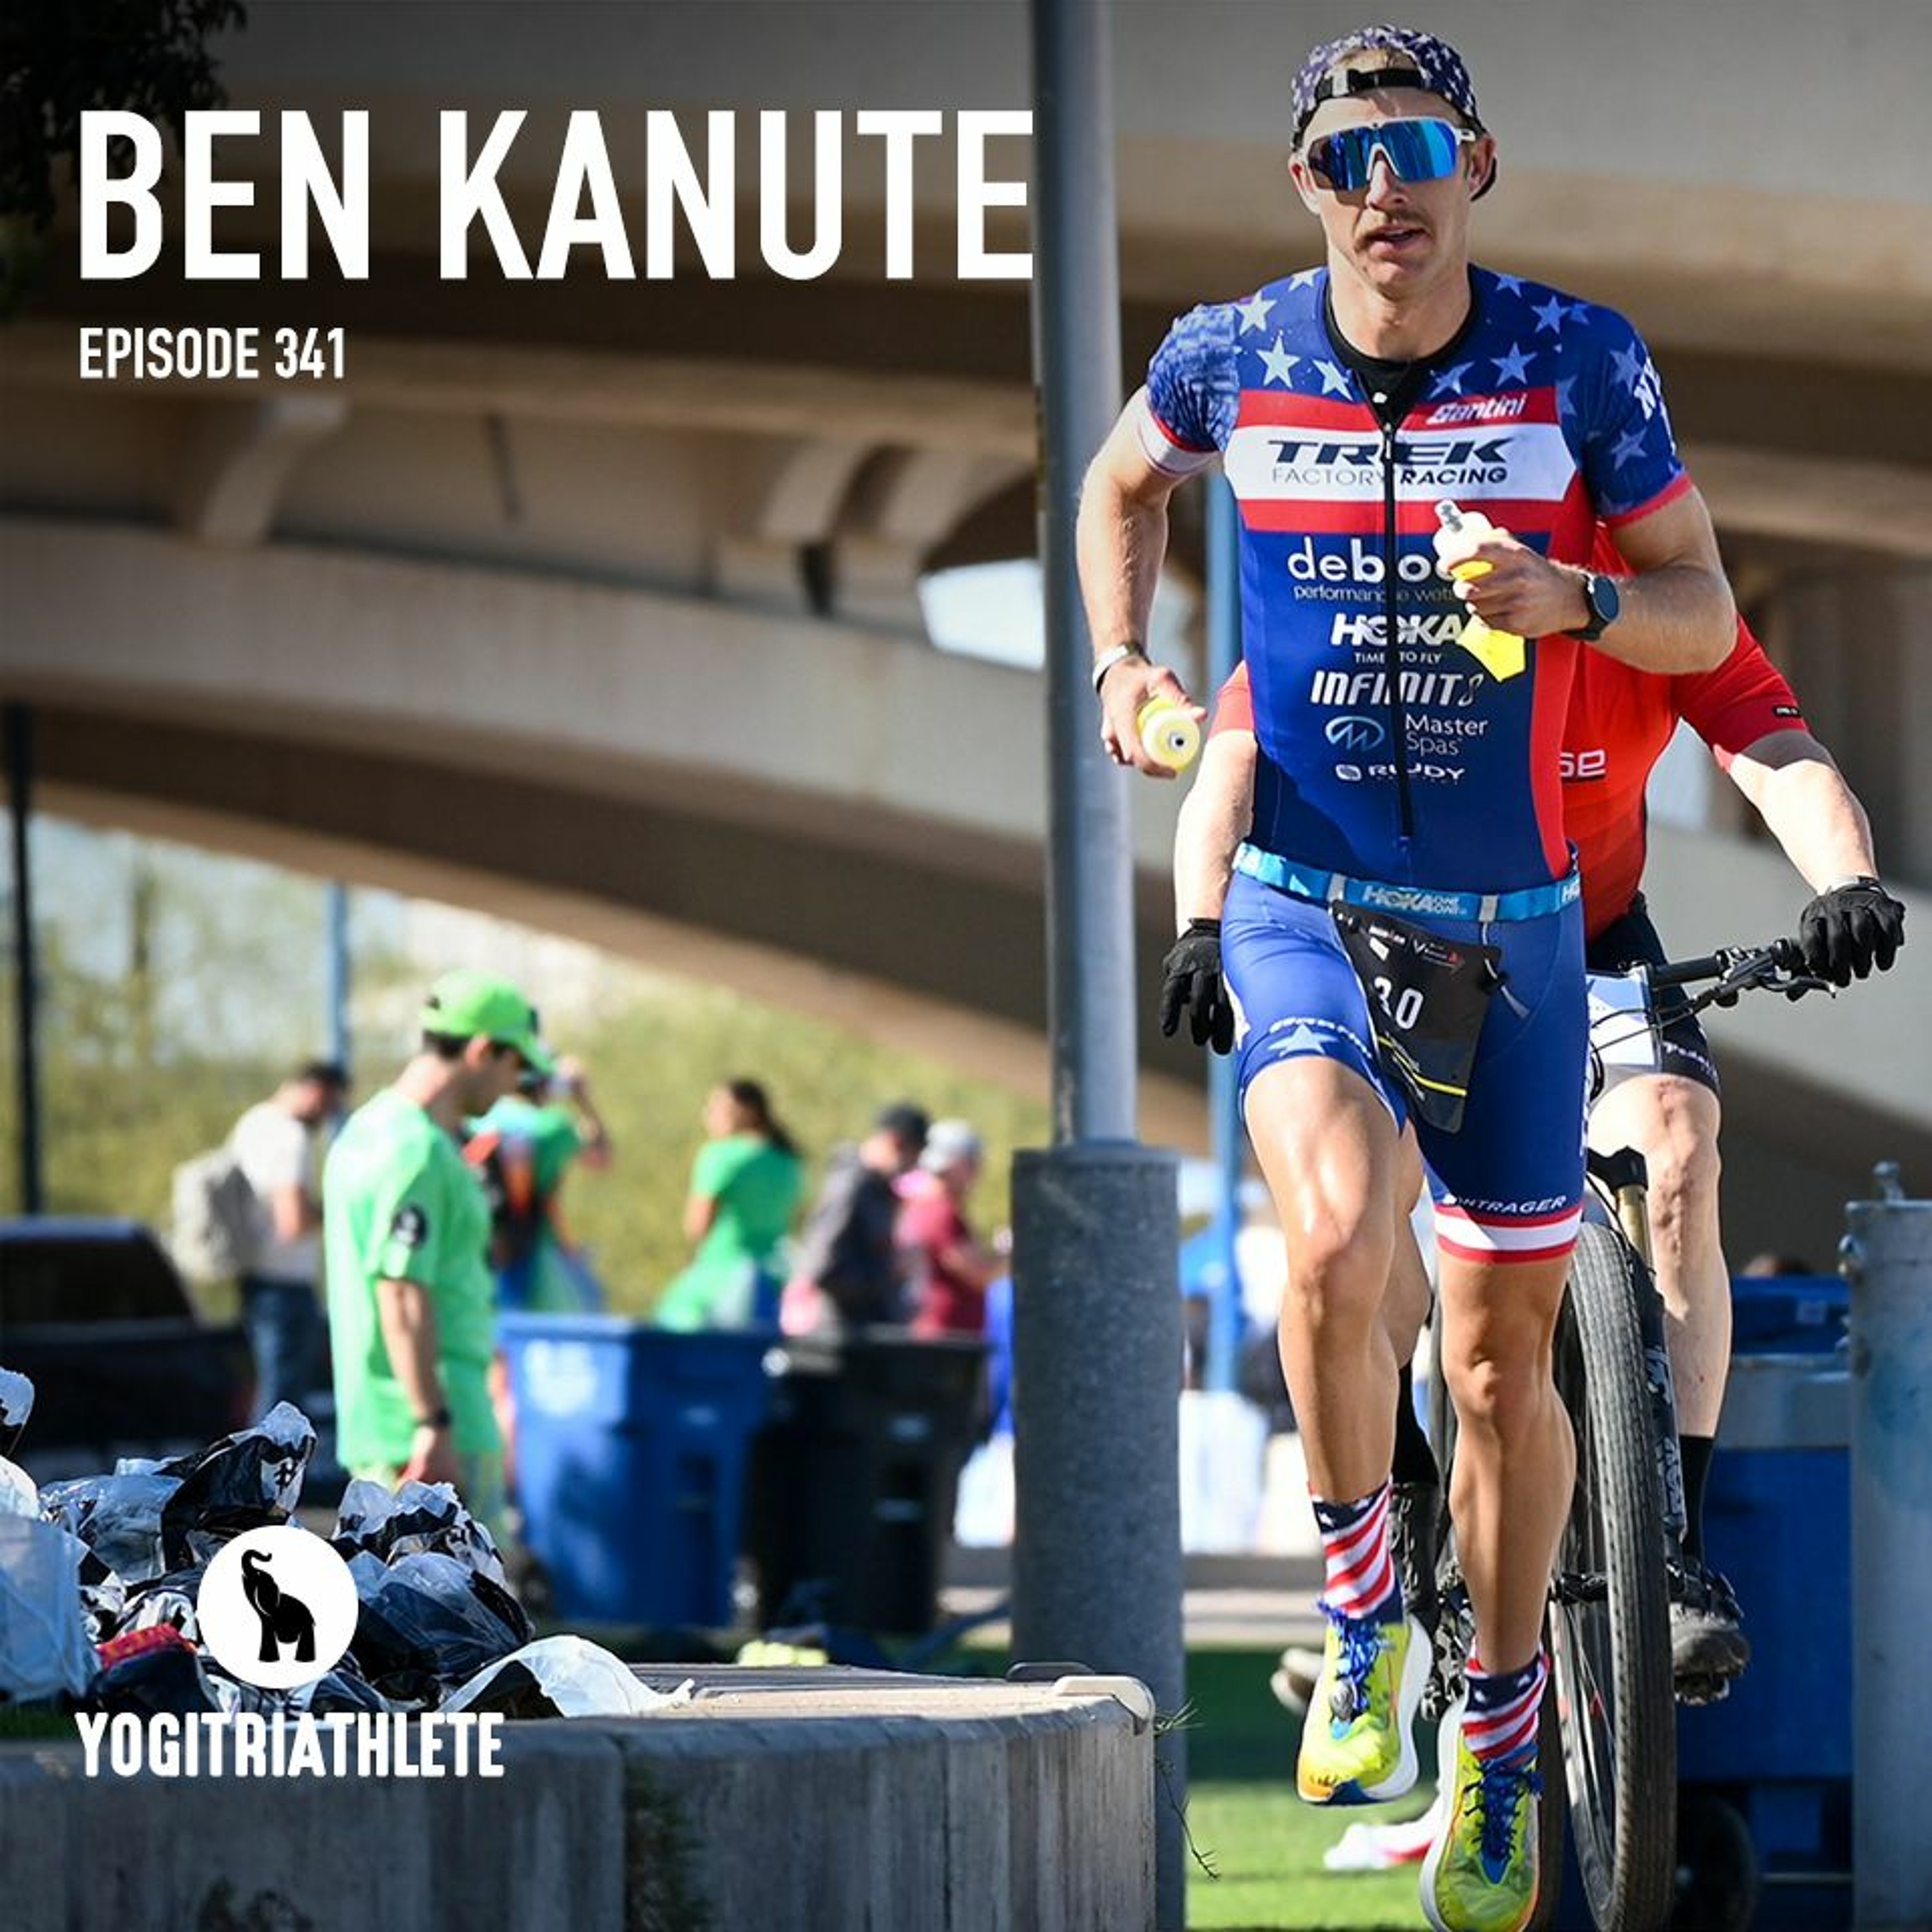 Professional Triathlete, Ben Kanute Delivers On The Day At IMAZ And Claims His Place In Kona